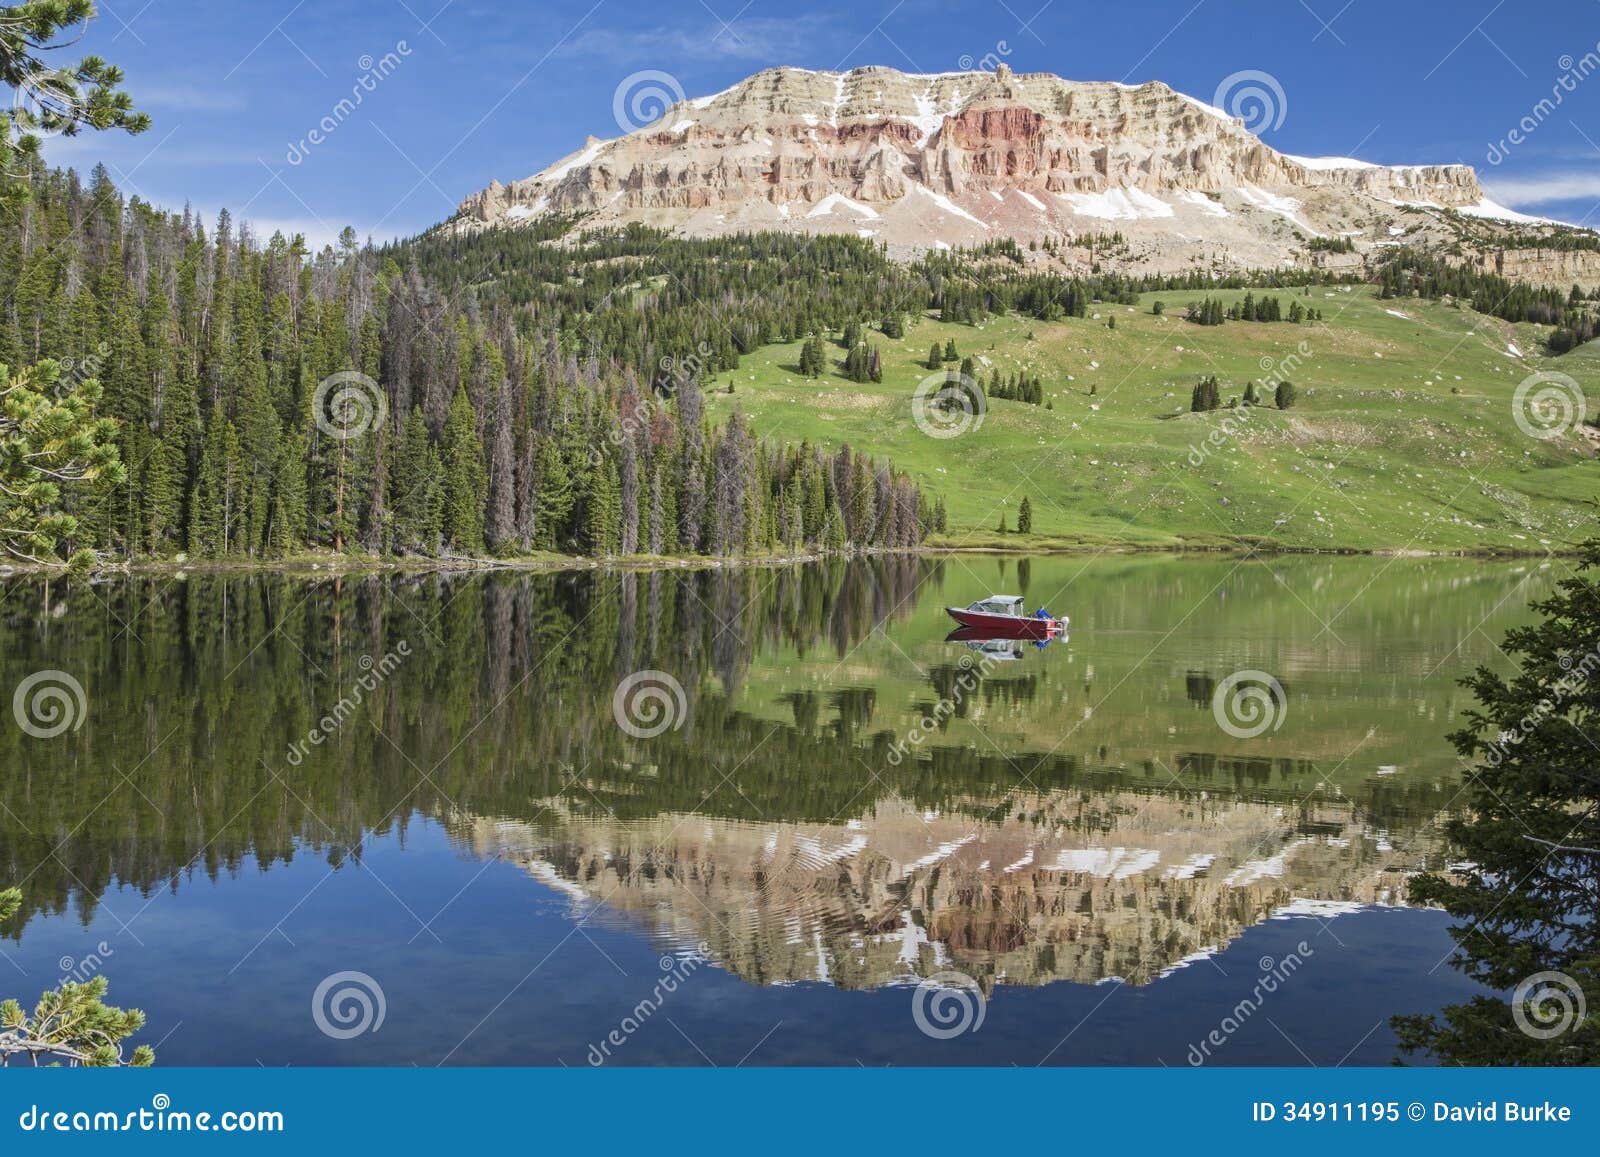 beartooth butte and bear lake with fishing boat